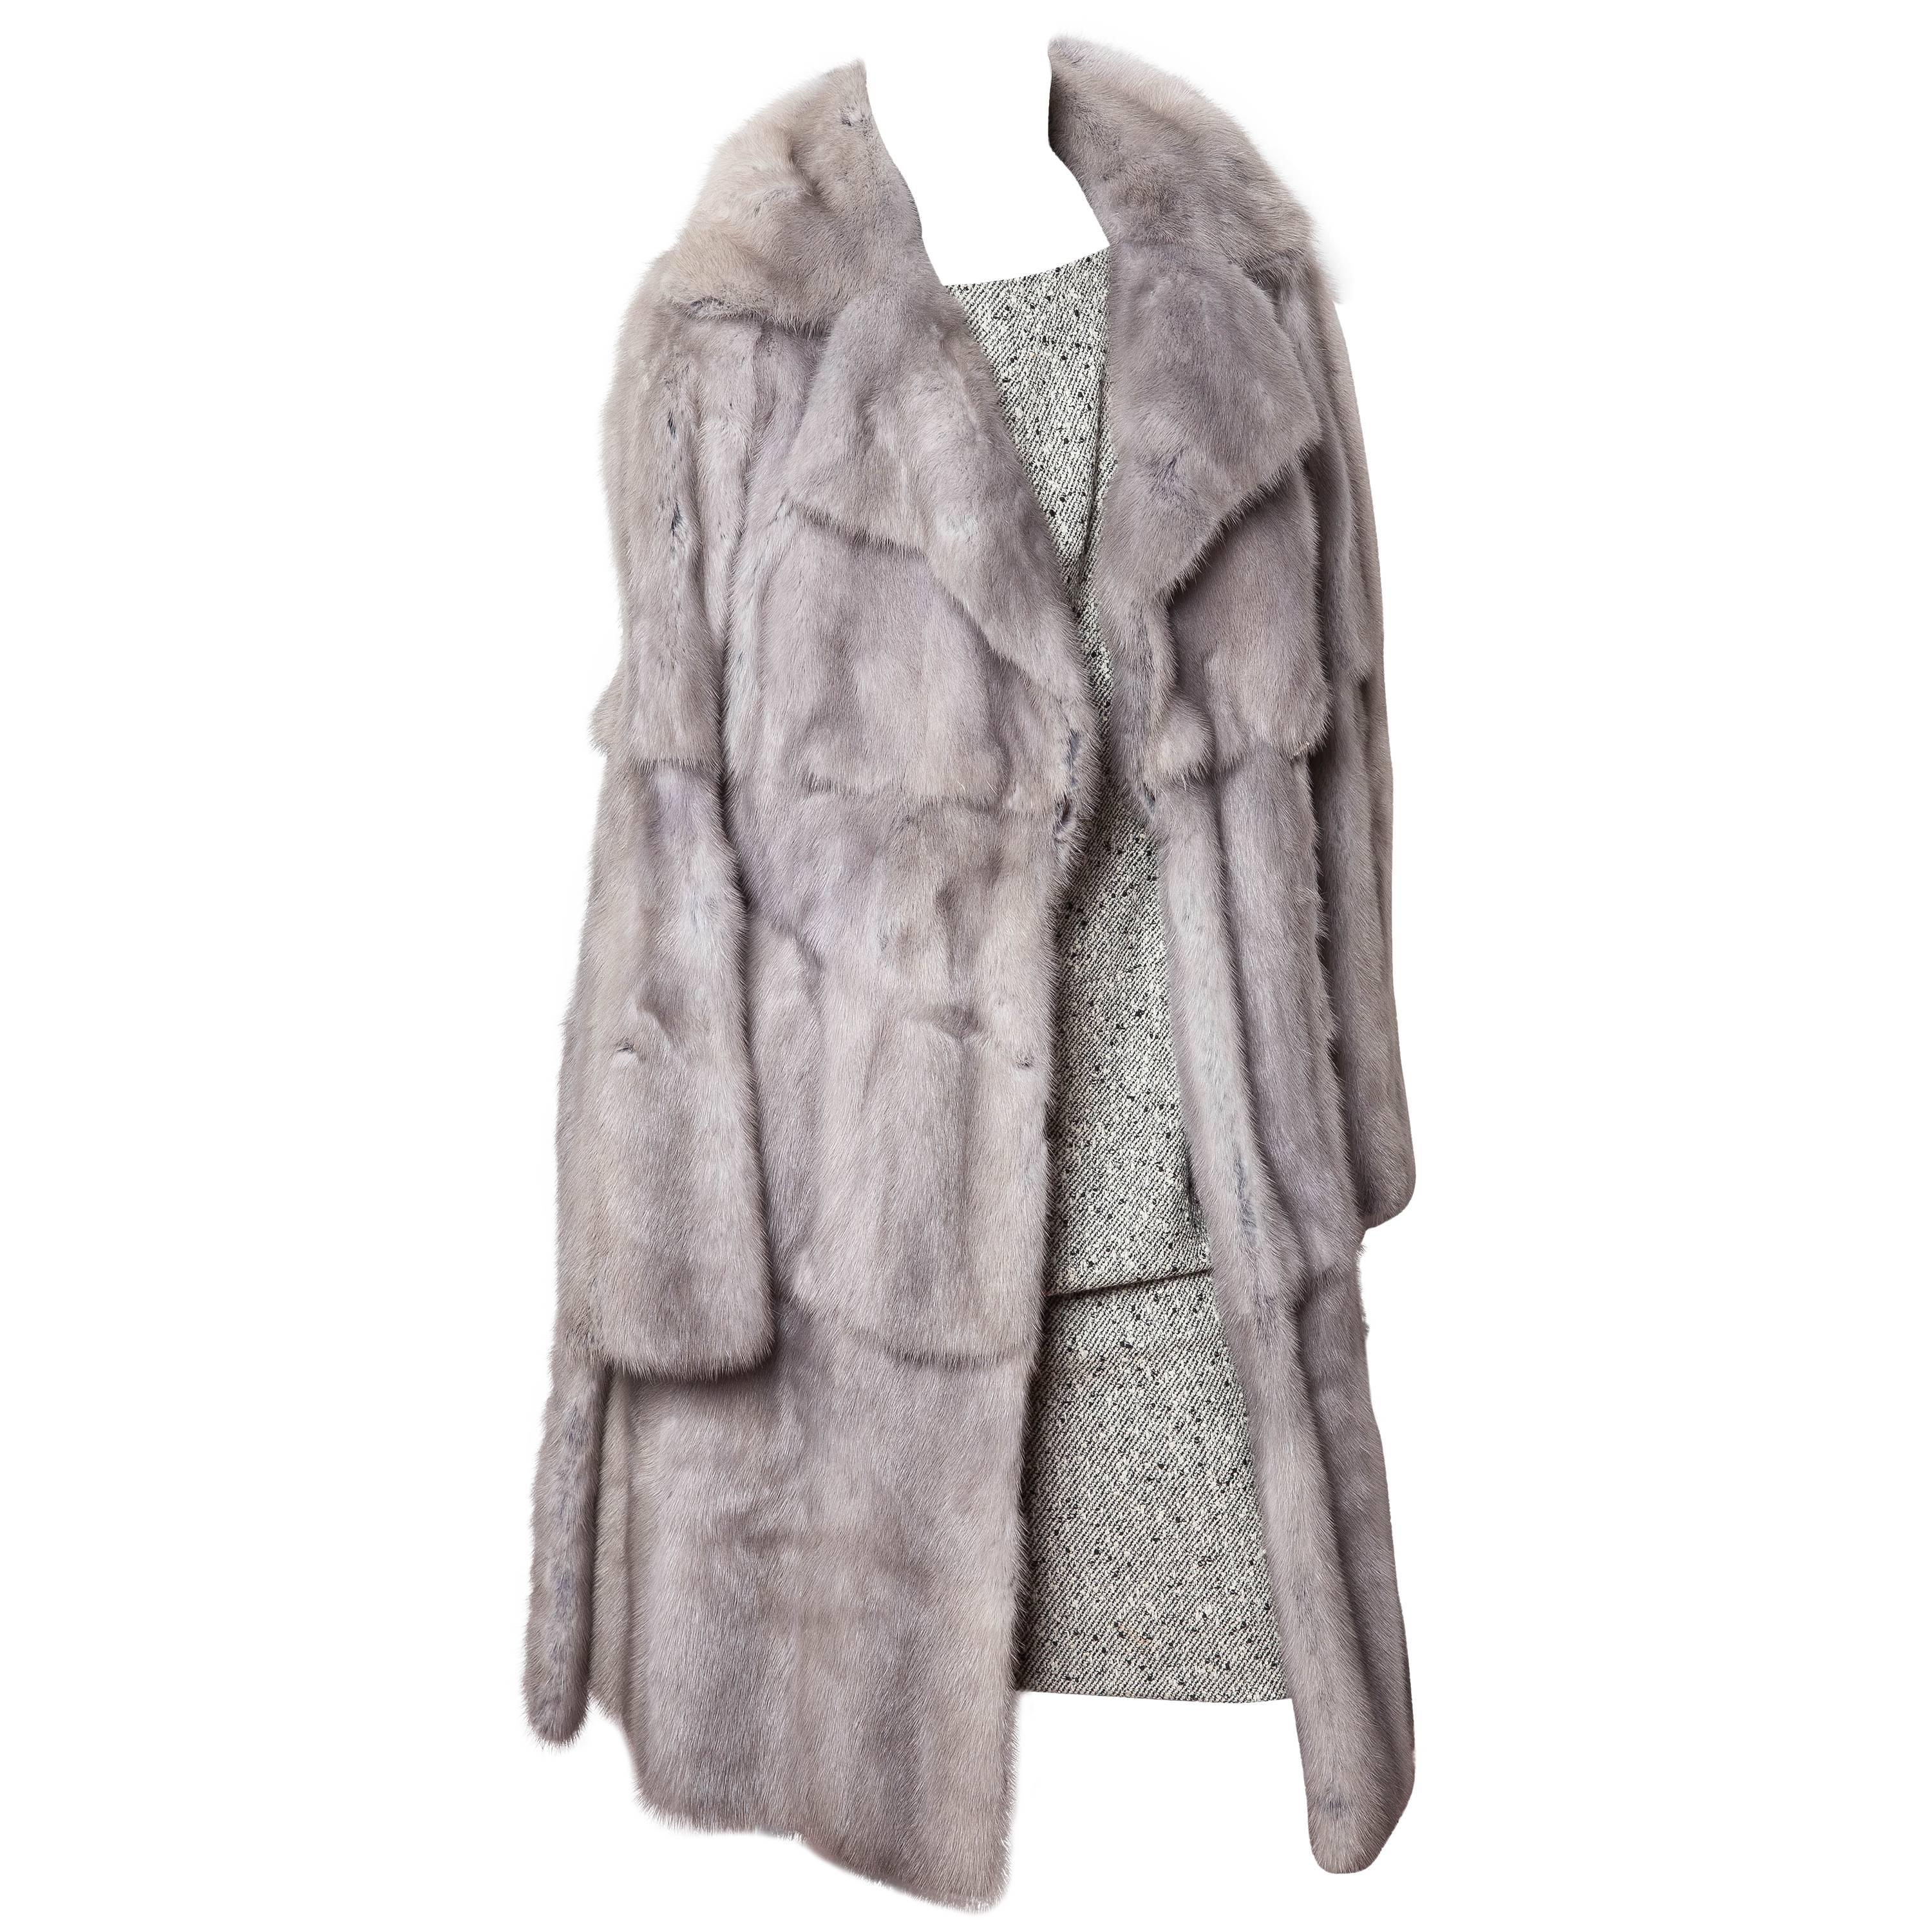 Fendi Runway Pearl Mink Coat with Blue Suede Accents